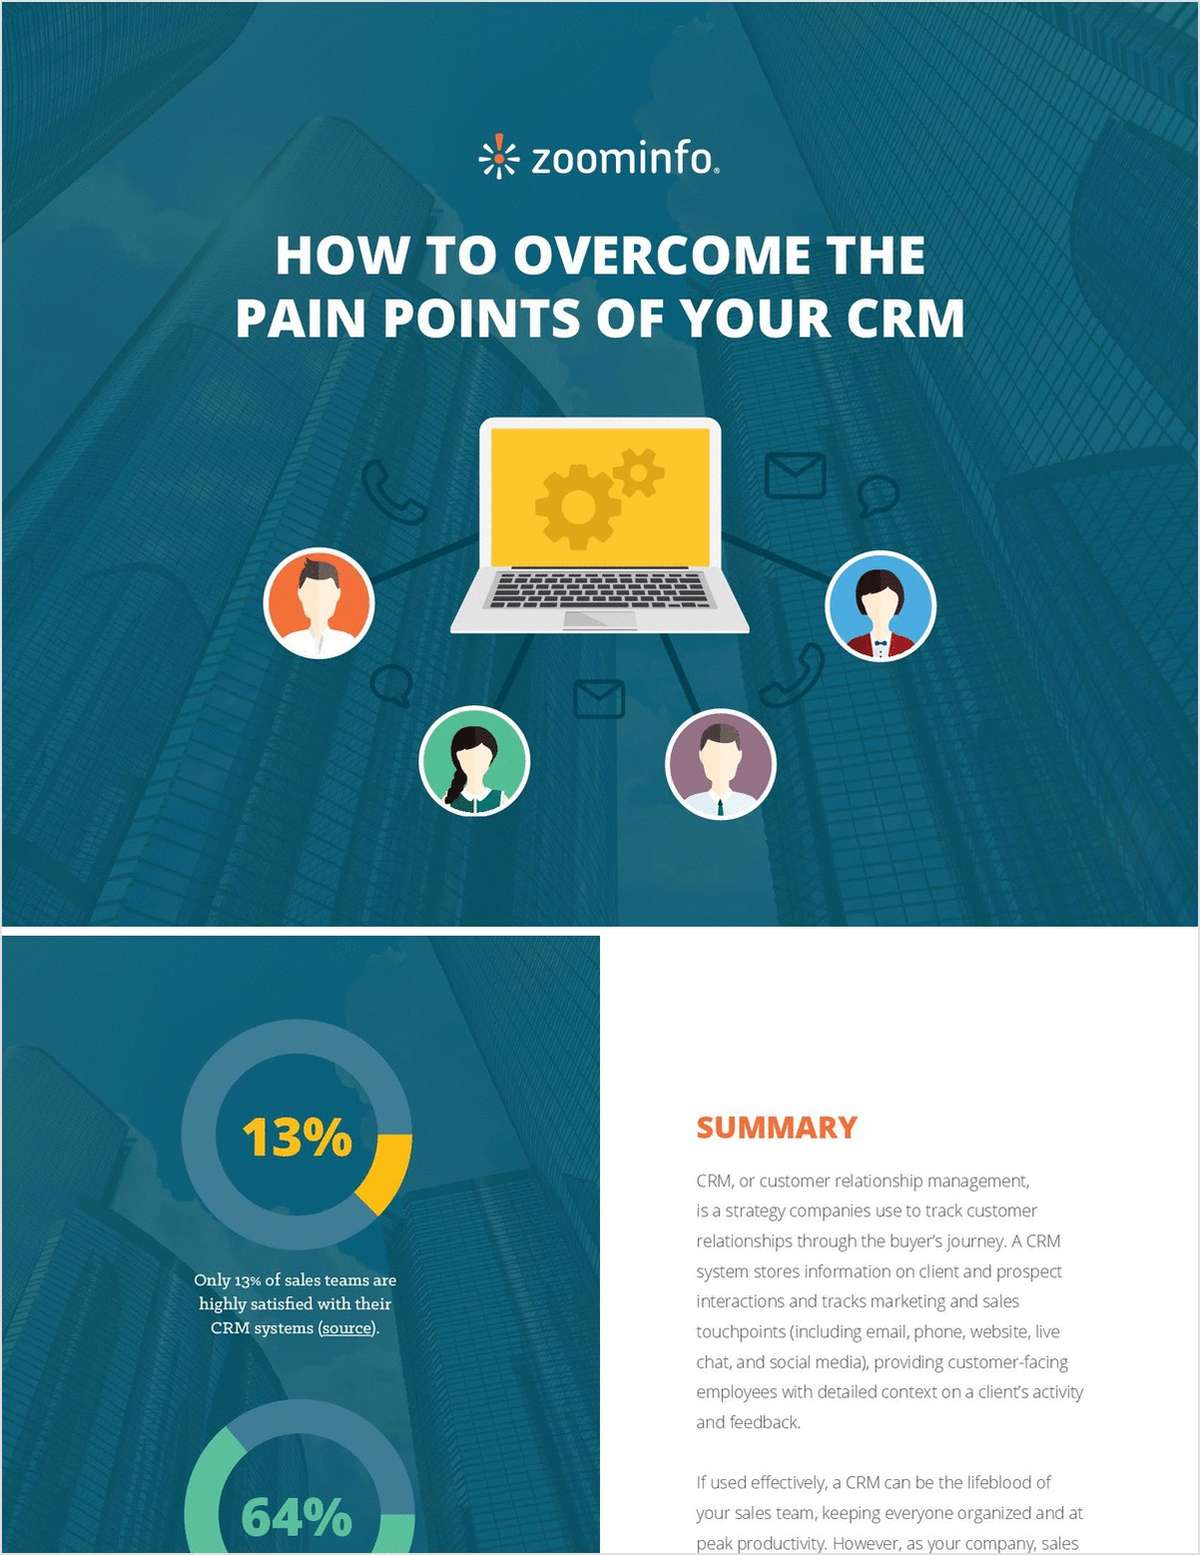 B2B Sales: How to Overcome the Pain Points of Your CRM